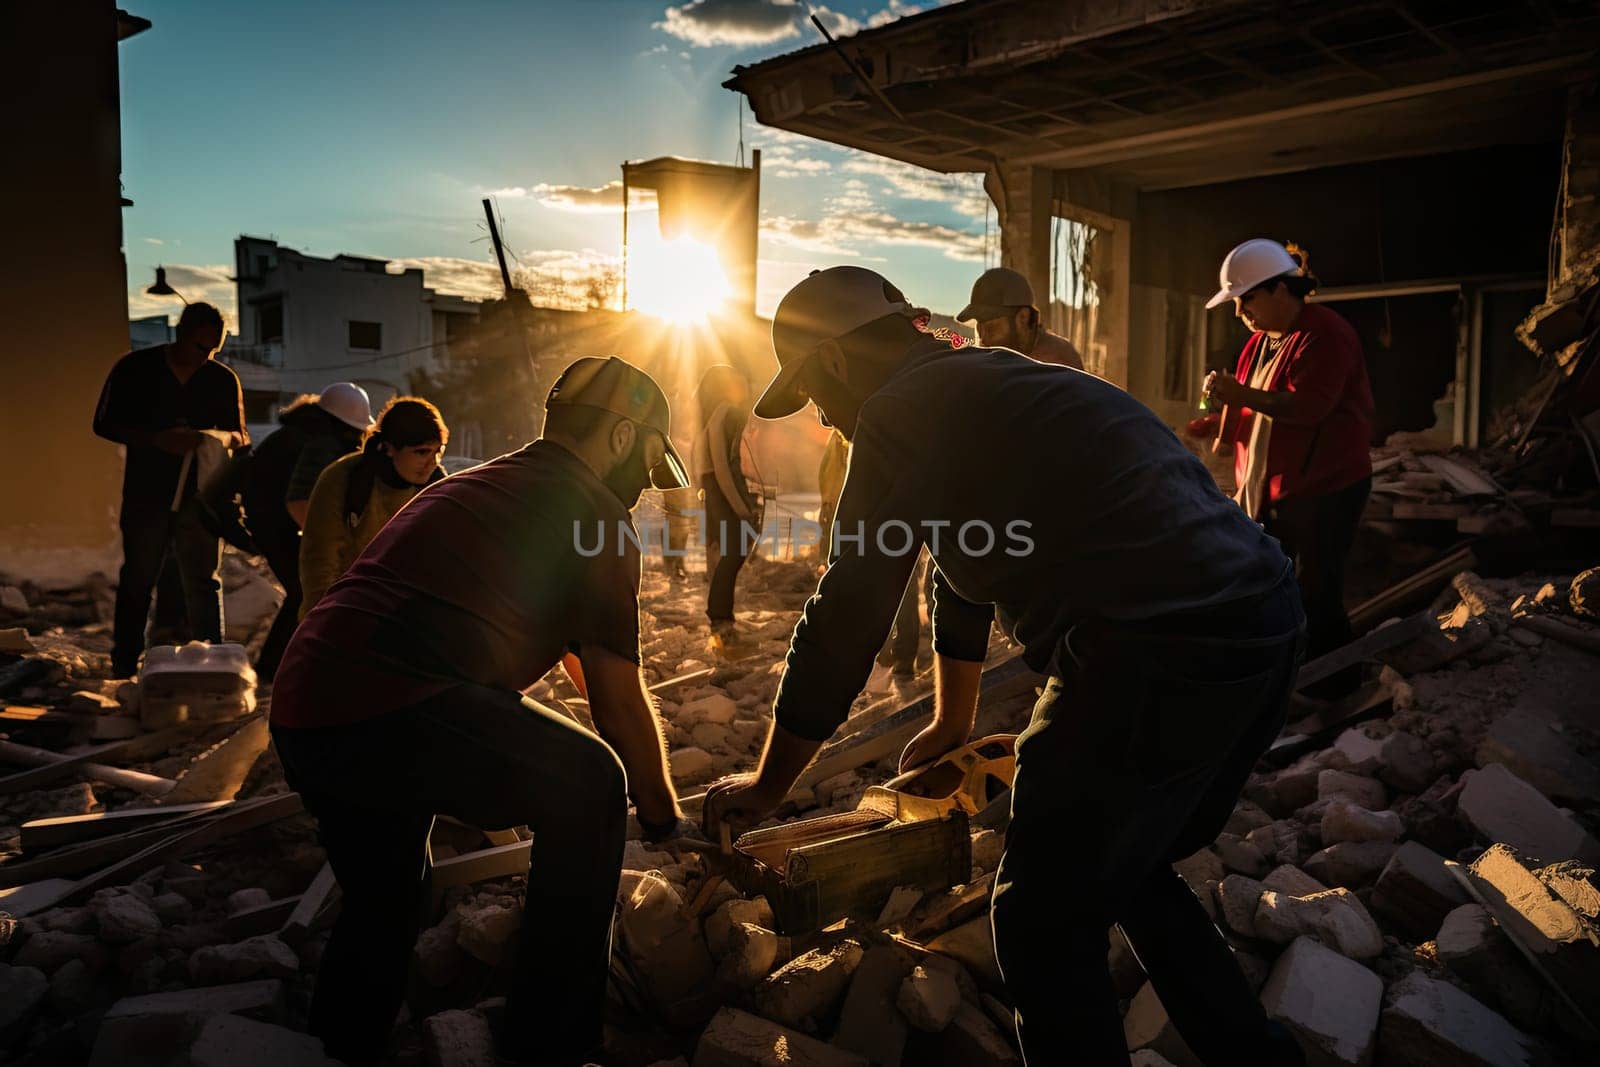 a group of men working in a building with rubble by golibtolibov